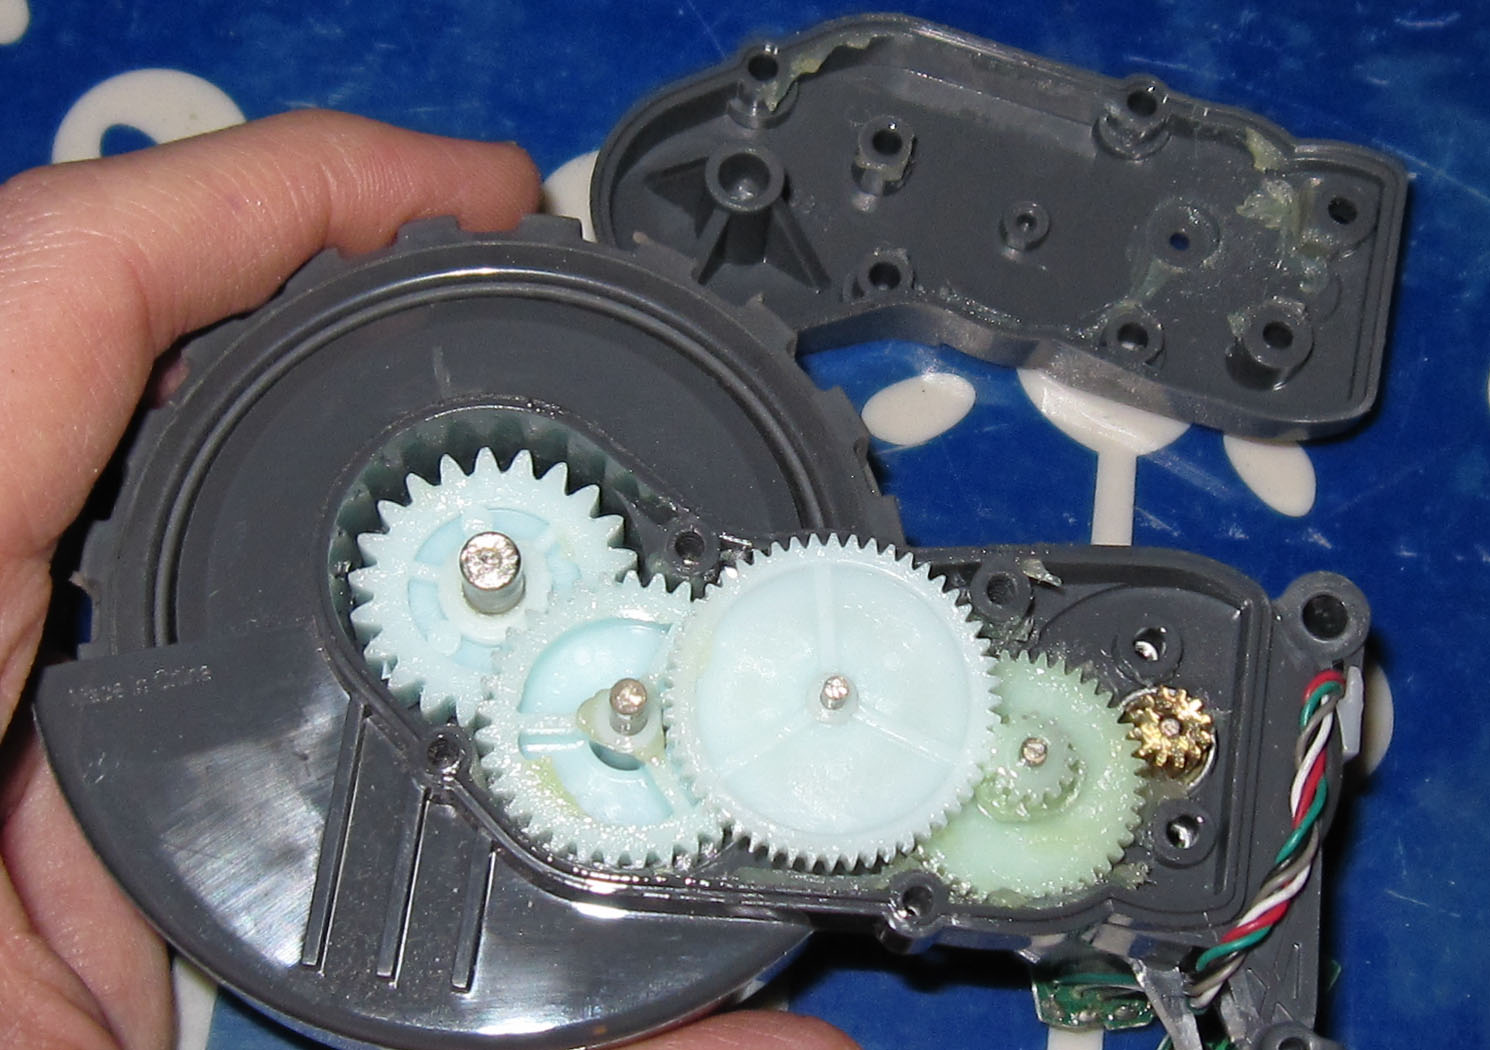 Tech for Passion: Roomba wheel assembly taken apart Hair/debris cleaning - Roomba 760, 770, 780